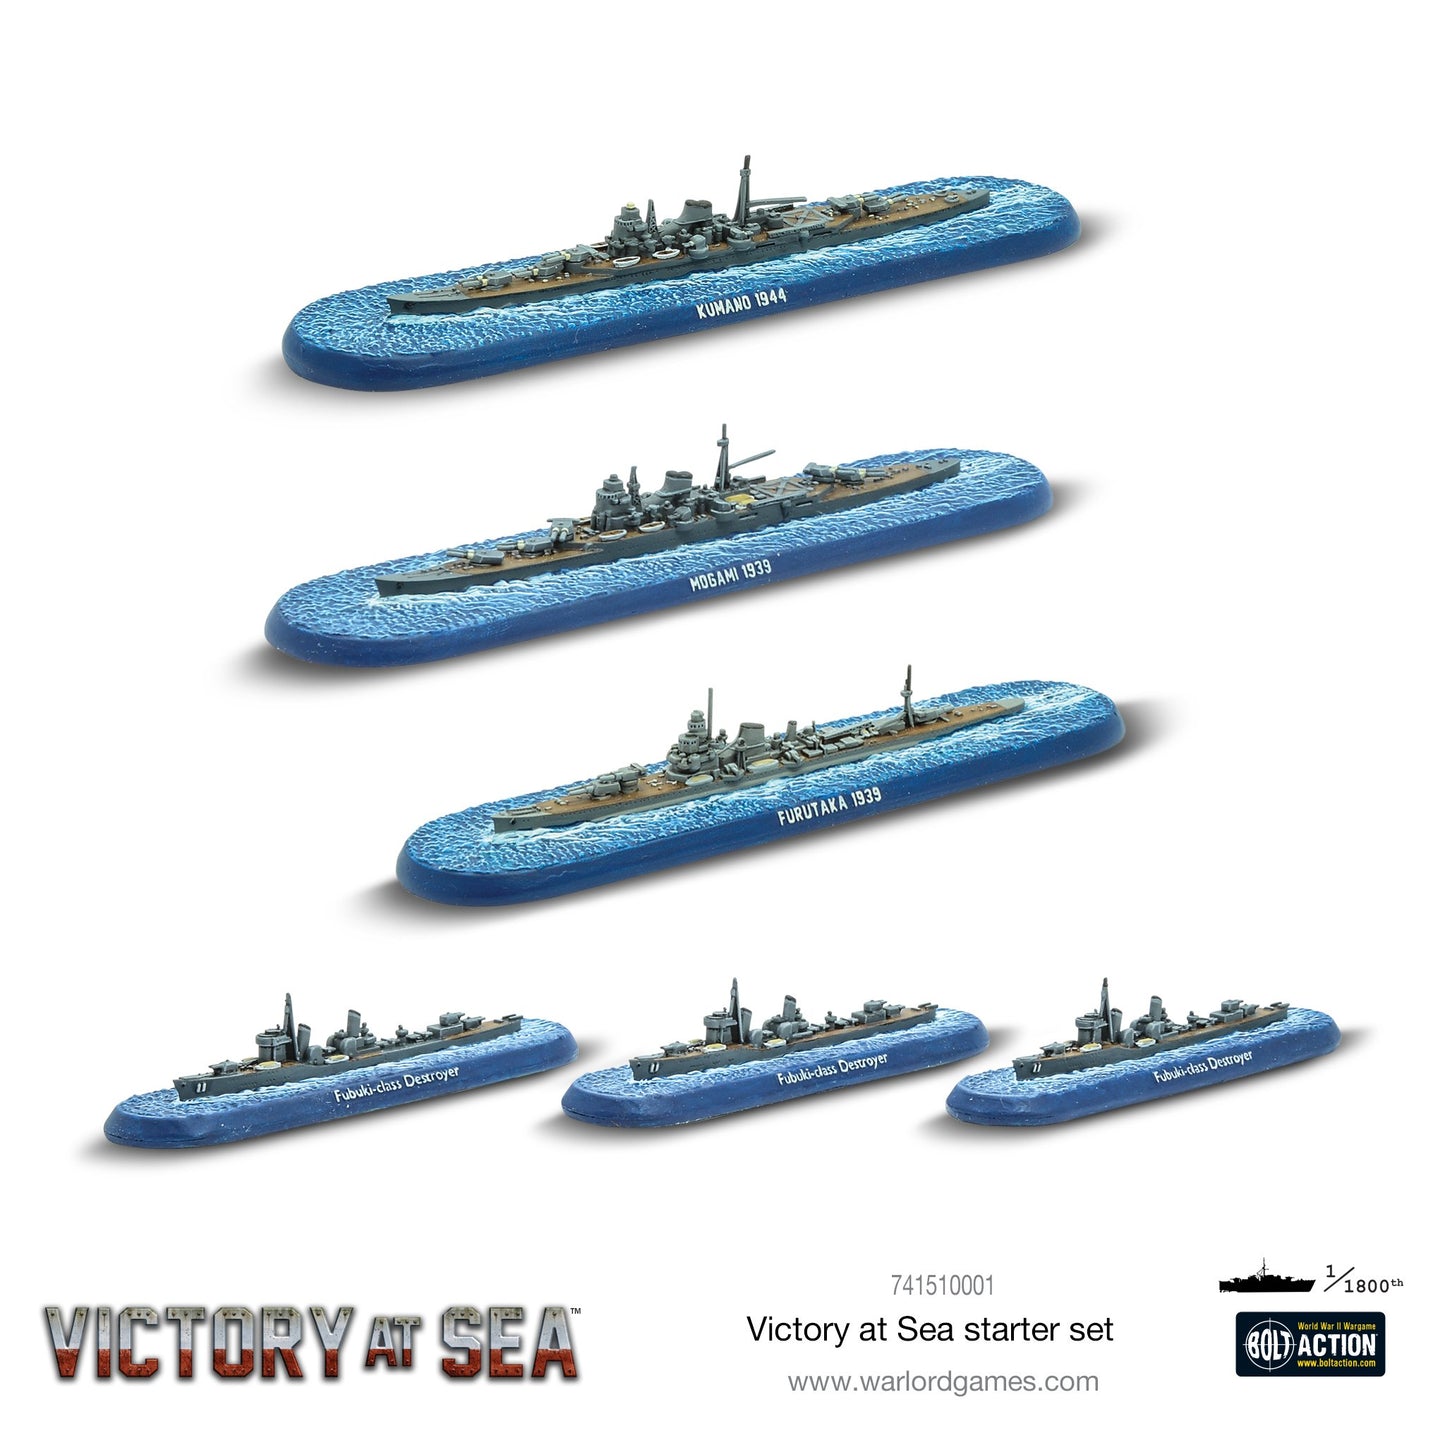 Battle for the Pacific - Victory At Sea Starter Set